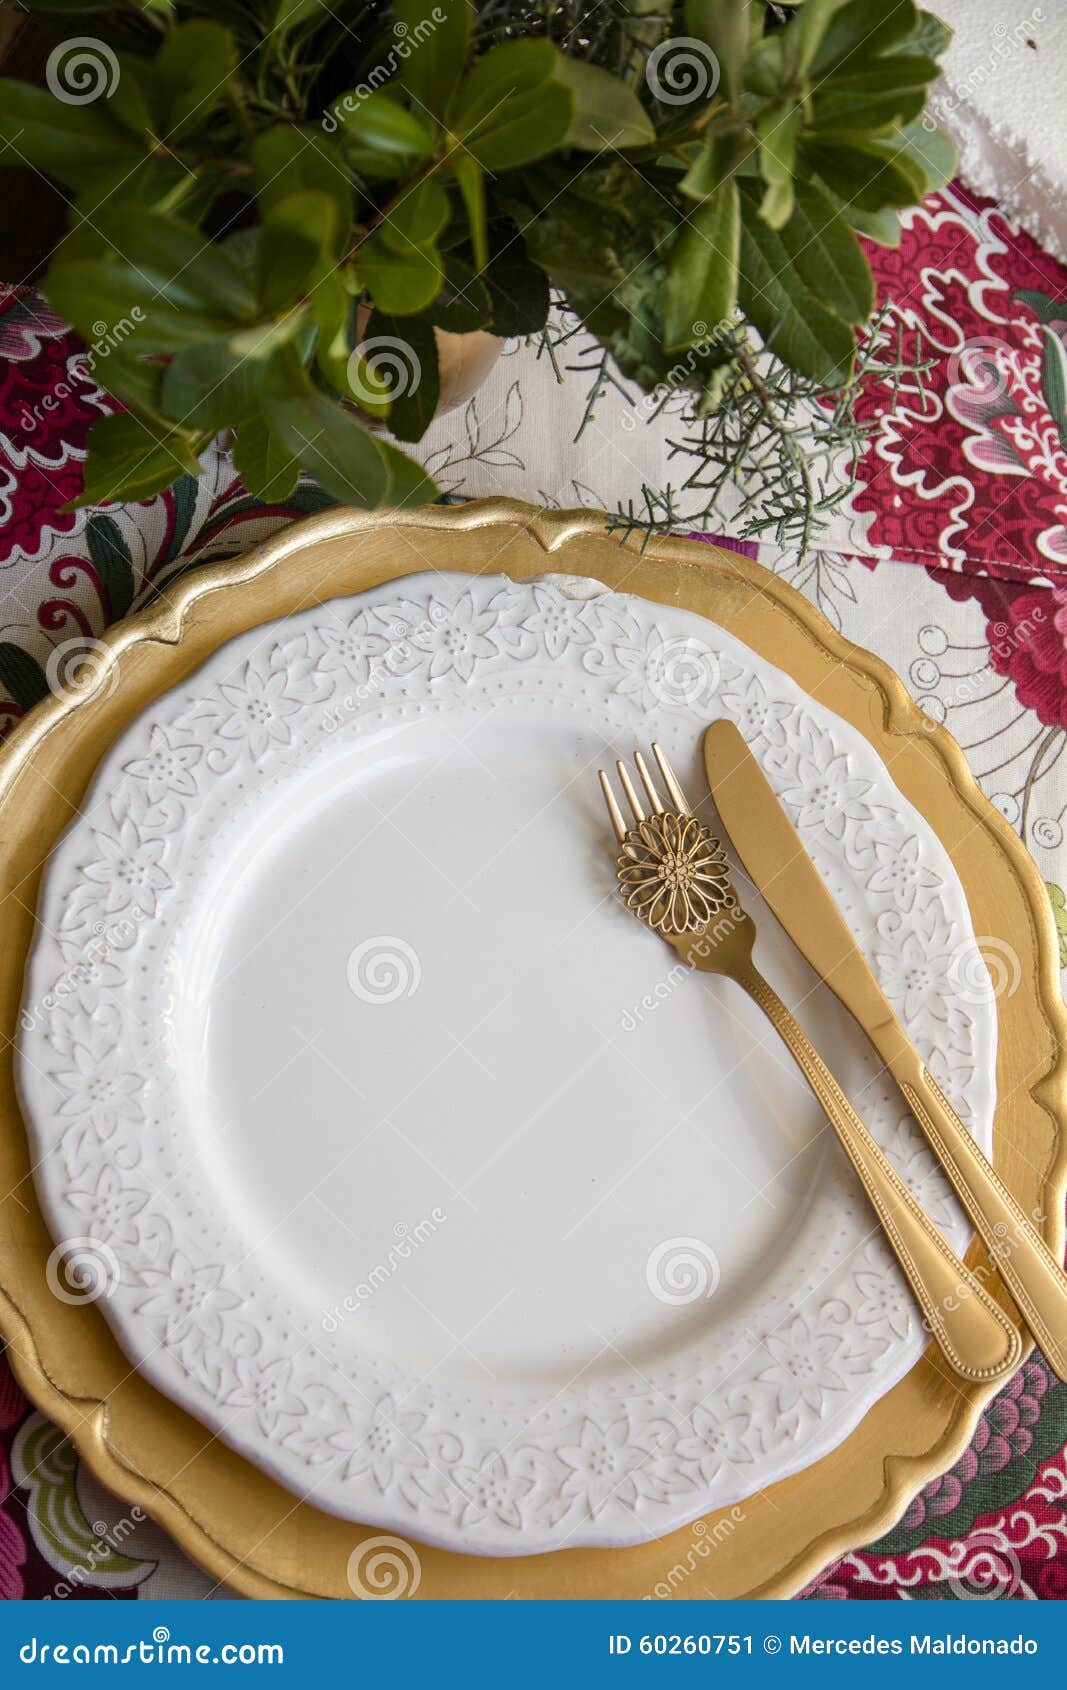 Christmas Place Setting, Gold and Flowers Stock Image - Image of ...